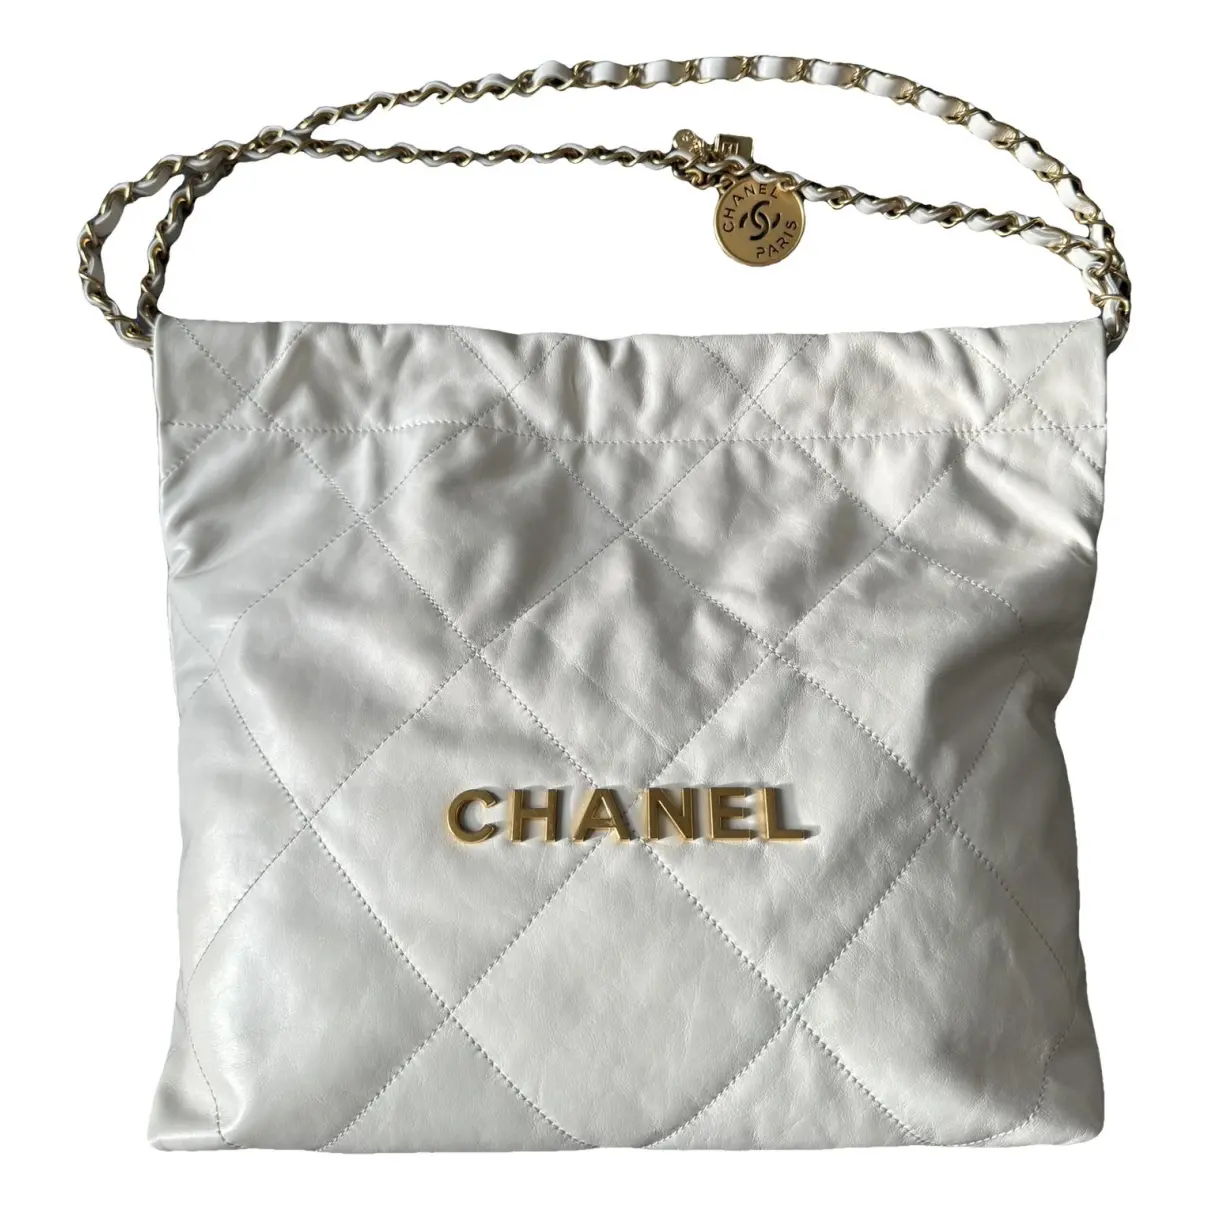 Chanel 22 leather tote